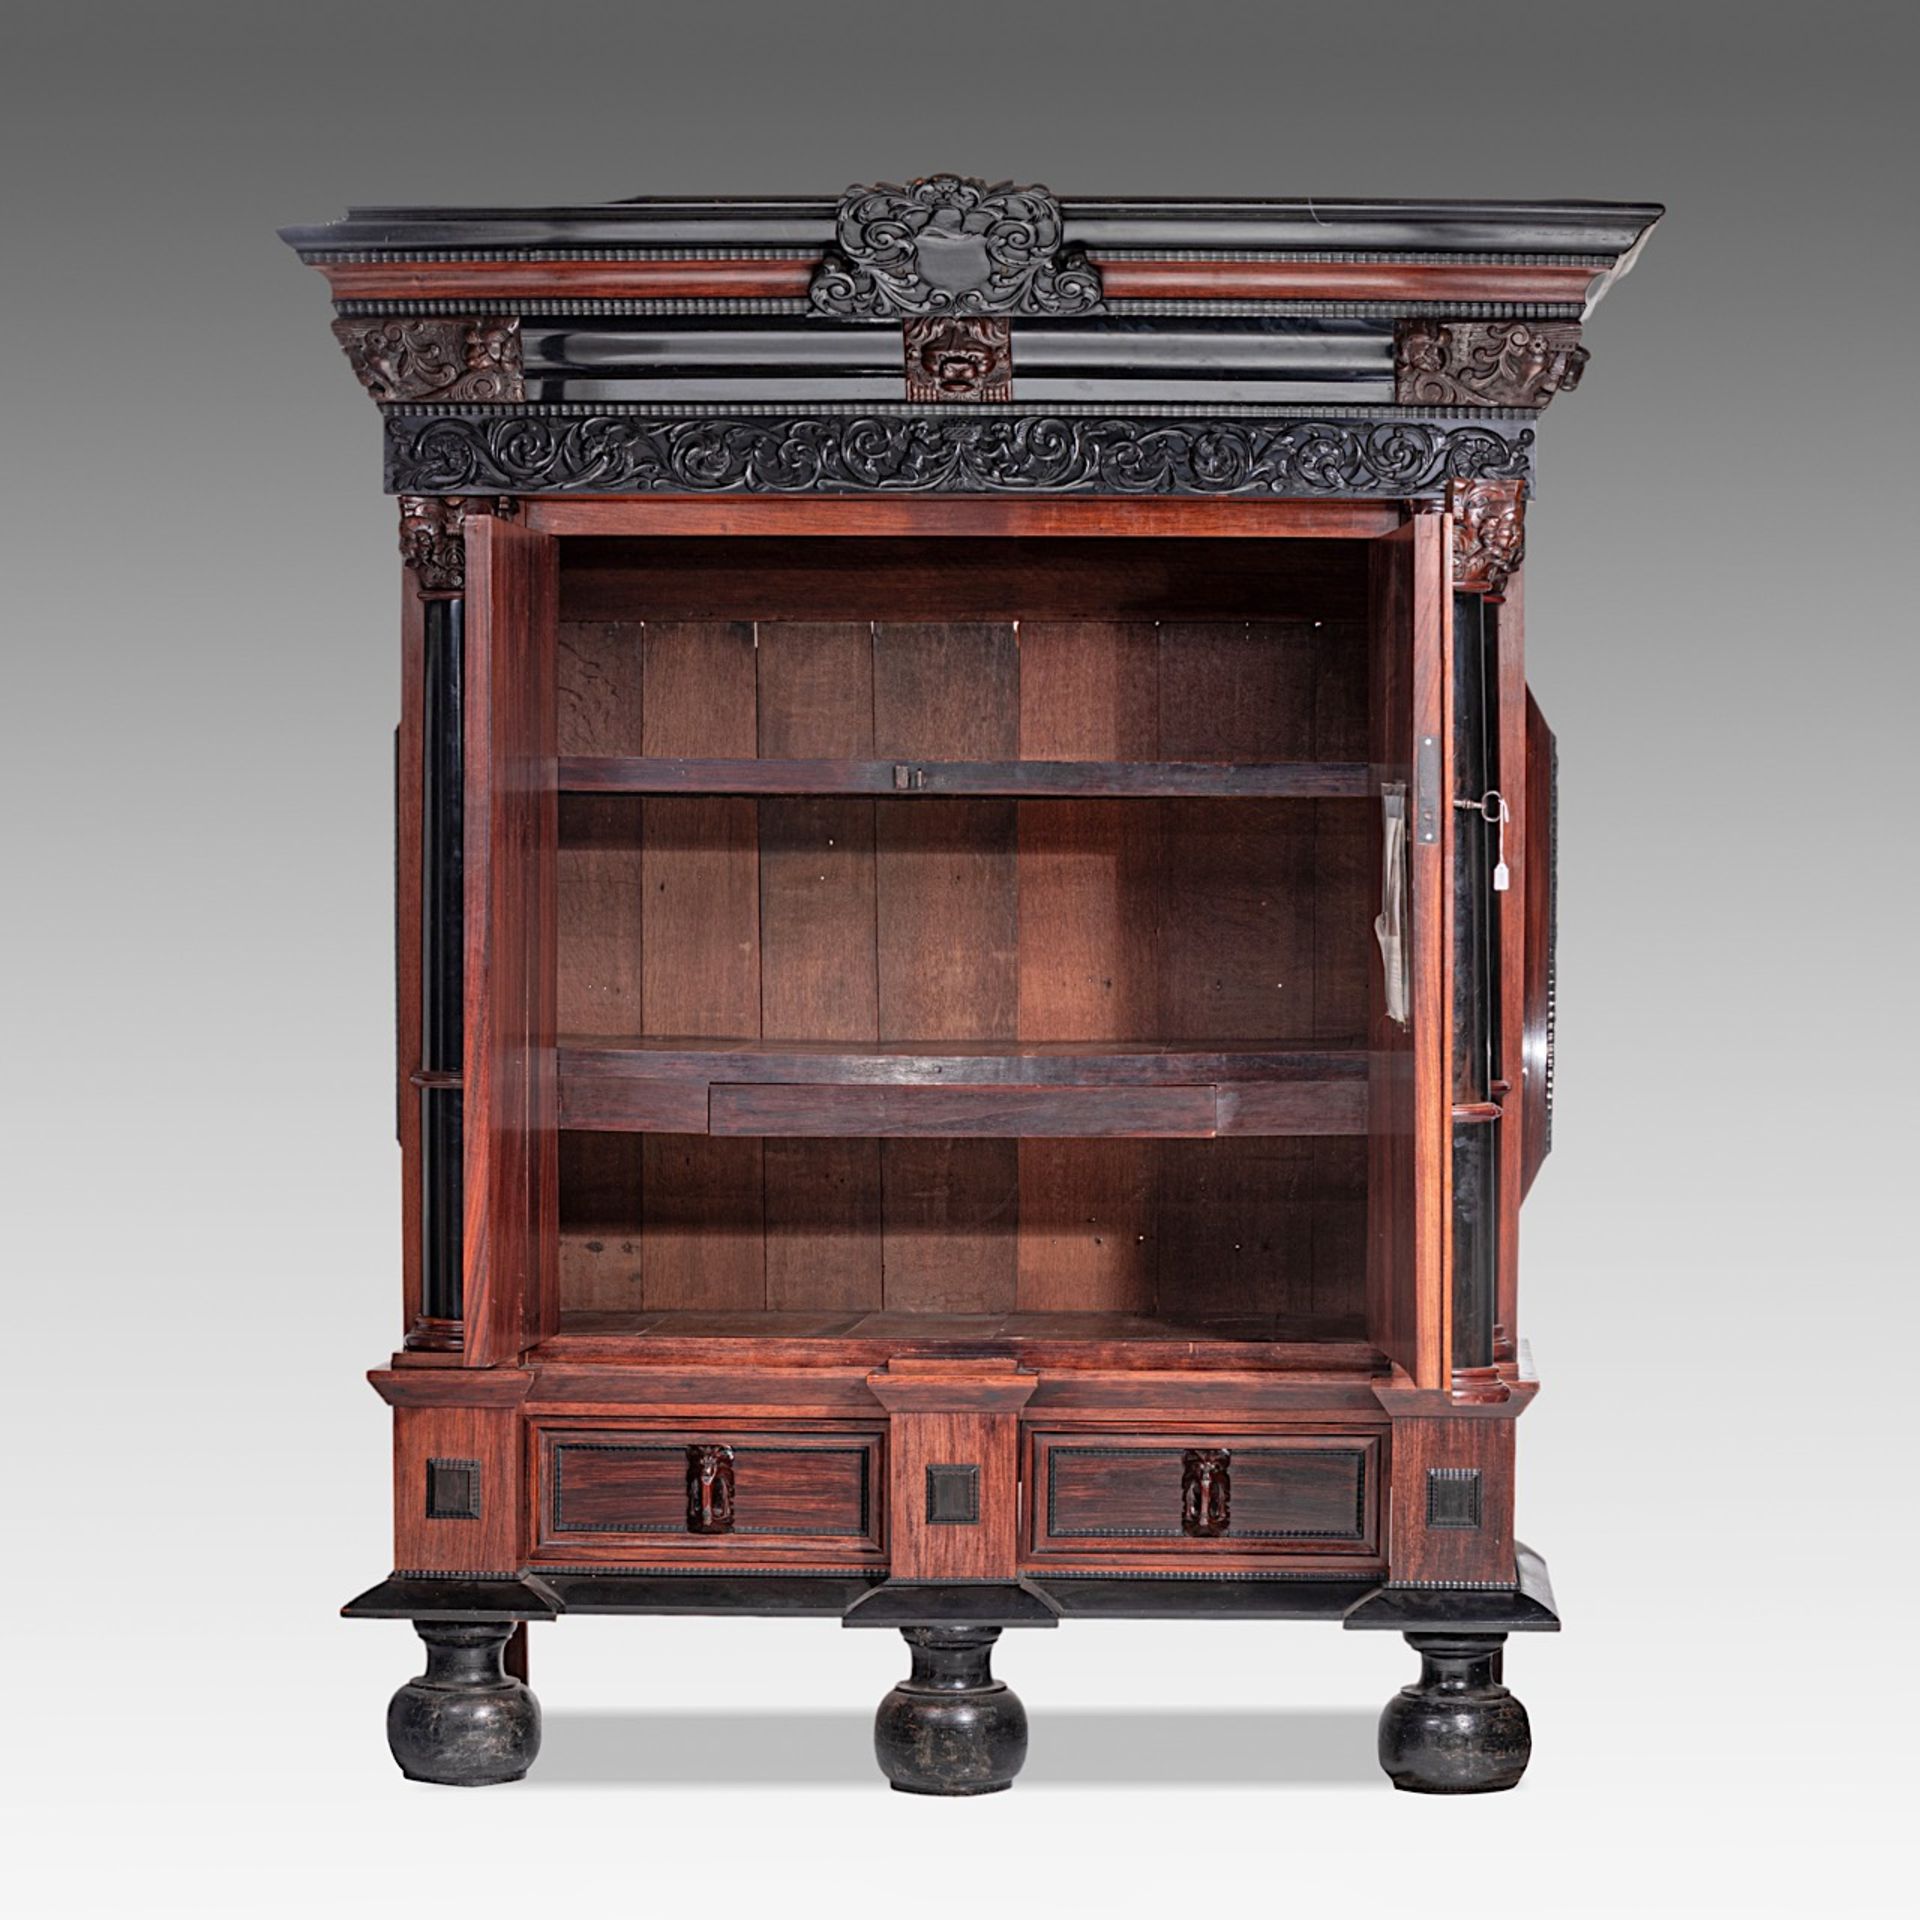 A large Baroque style rosewood and ebony cupboard, H 235 - W 200 - D 85 cm - Image 6 of 6